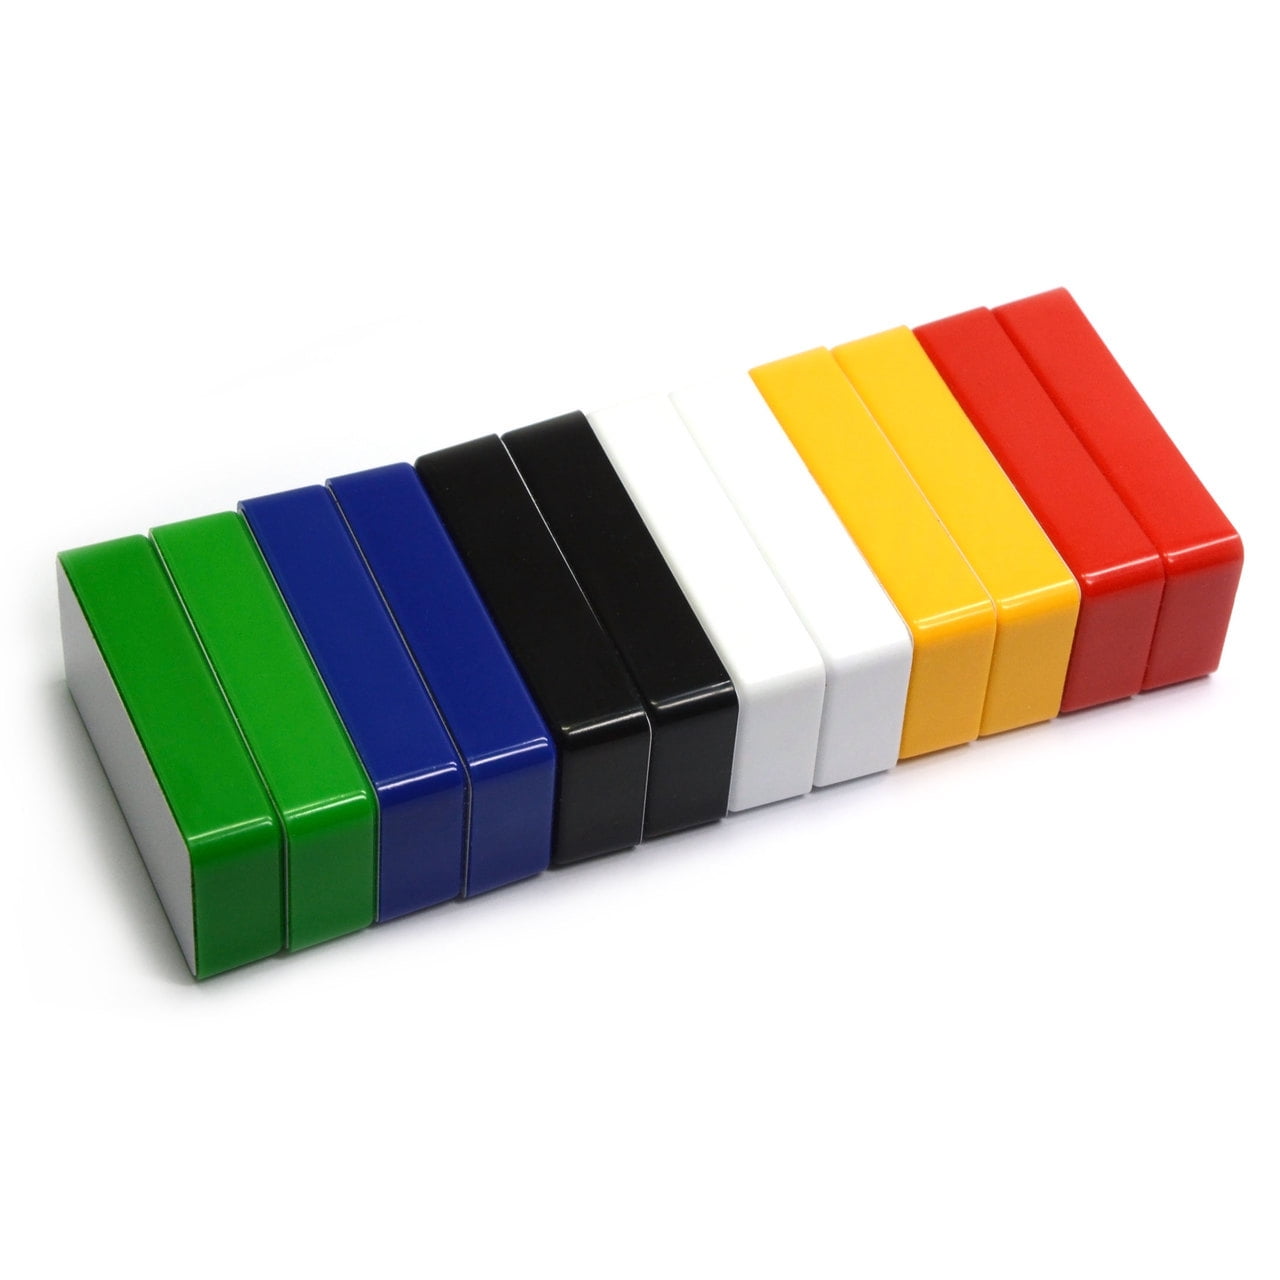 Cms Magnetics 12 Count Multi-Color Magnetic Whiteboard Magnets - Can Hold Up to 37 Pages on Steel Cabinet - Domino Size Good for Magnetic